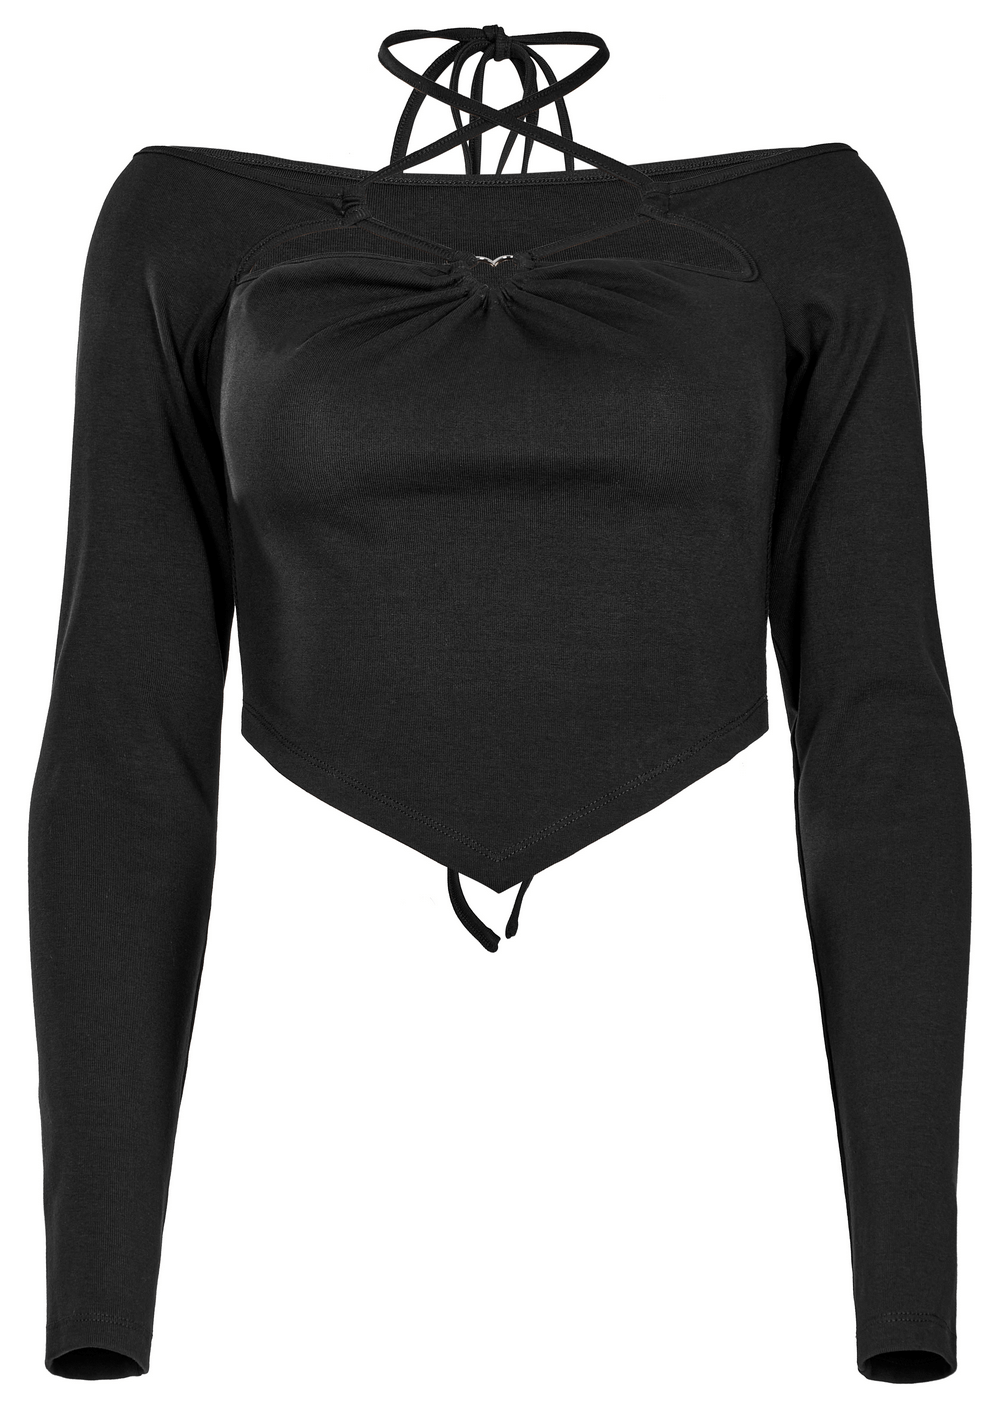 Chic Black Sweetheart Neck Off-the-Shoulder Top